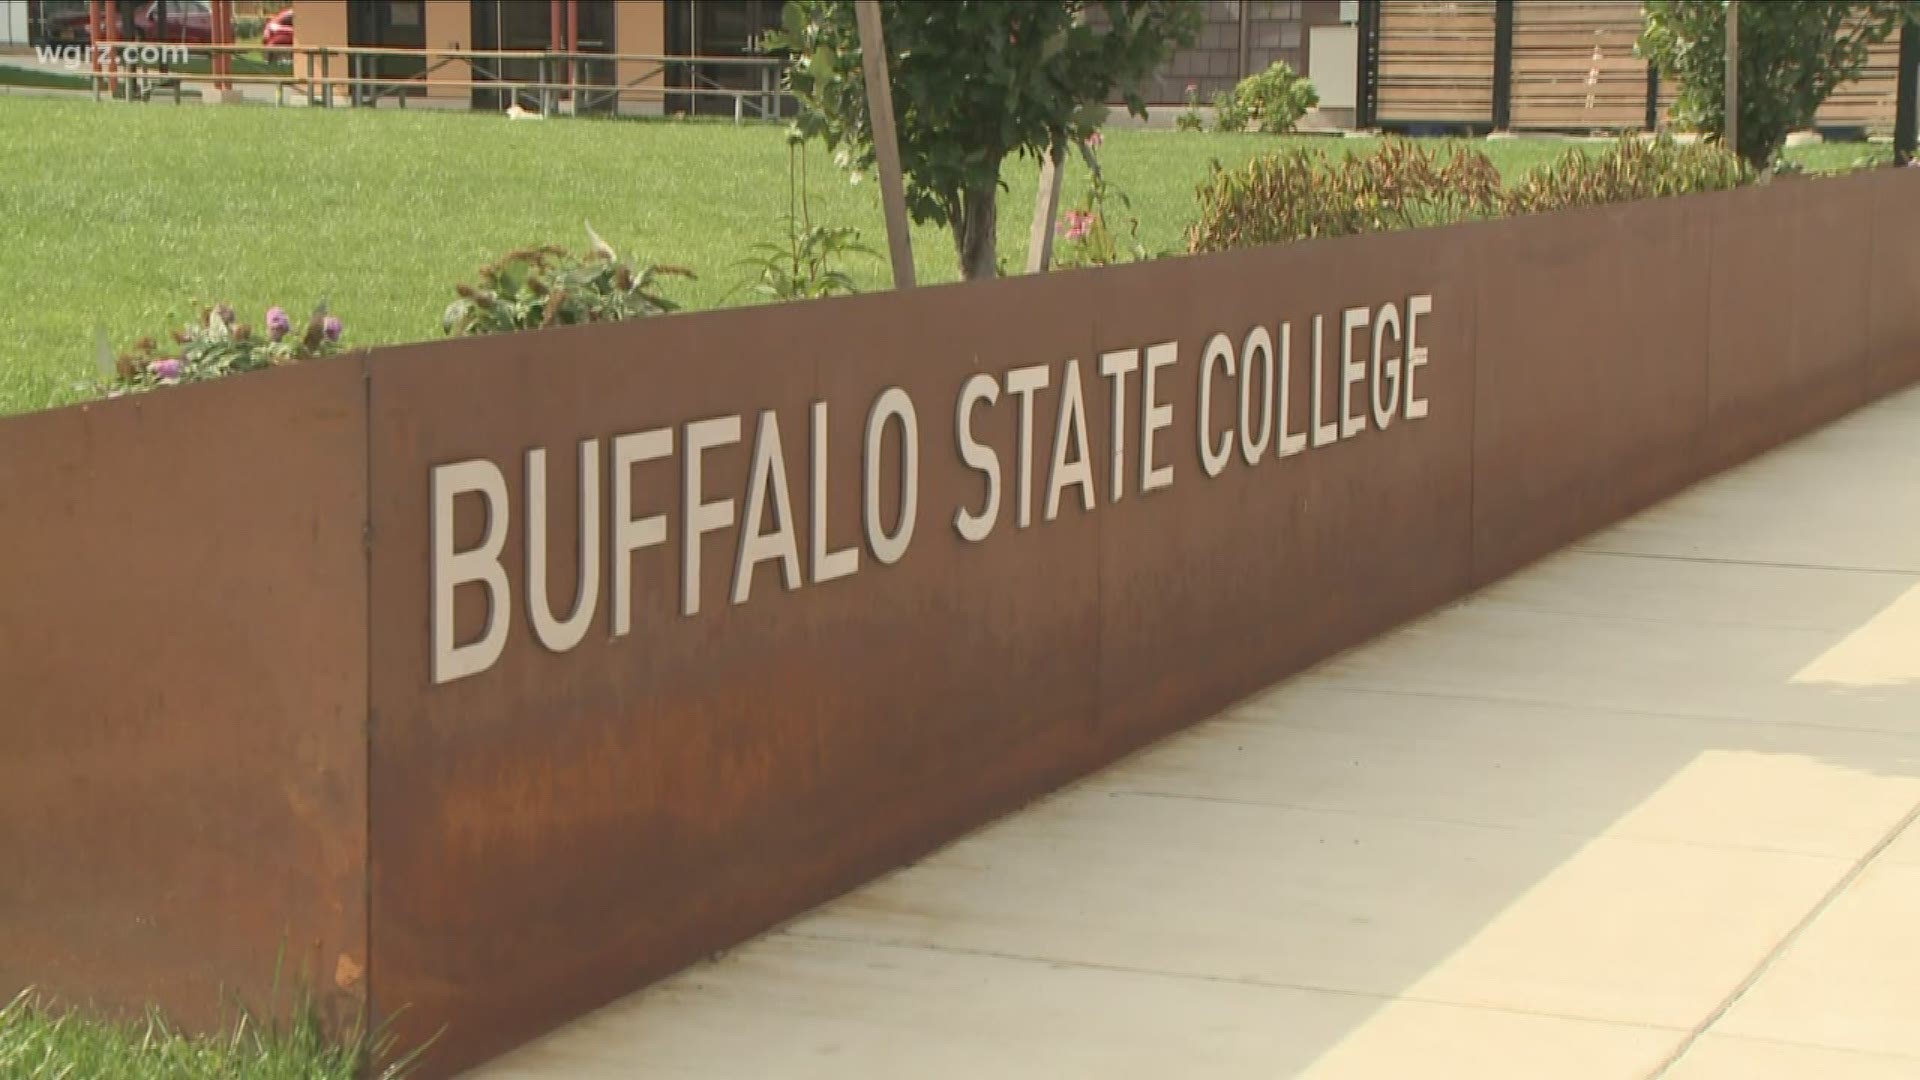 Buffalo State women's head soccer coach has behaved inappropriately making hurtful, mocking, and embarrassing comments toward players.